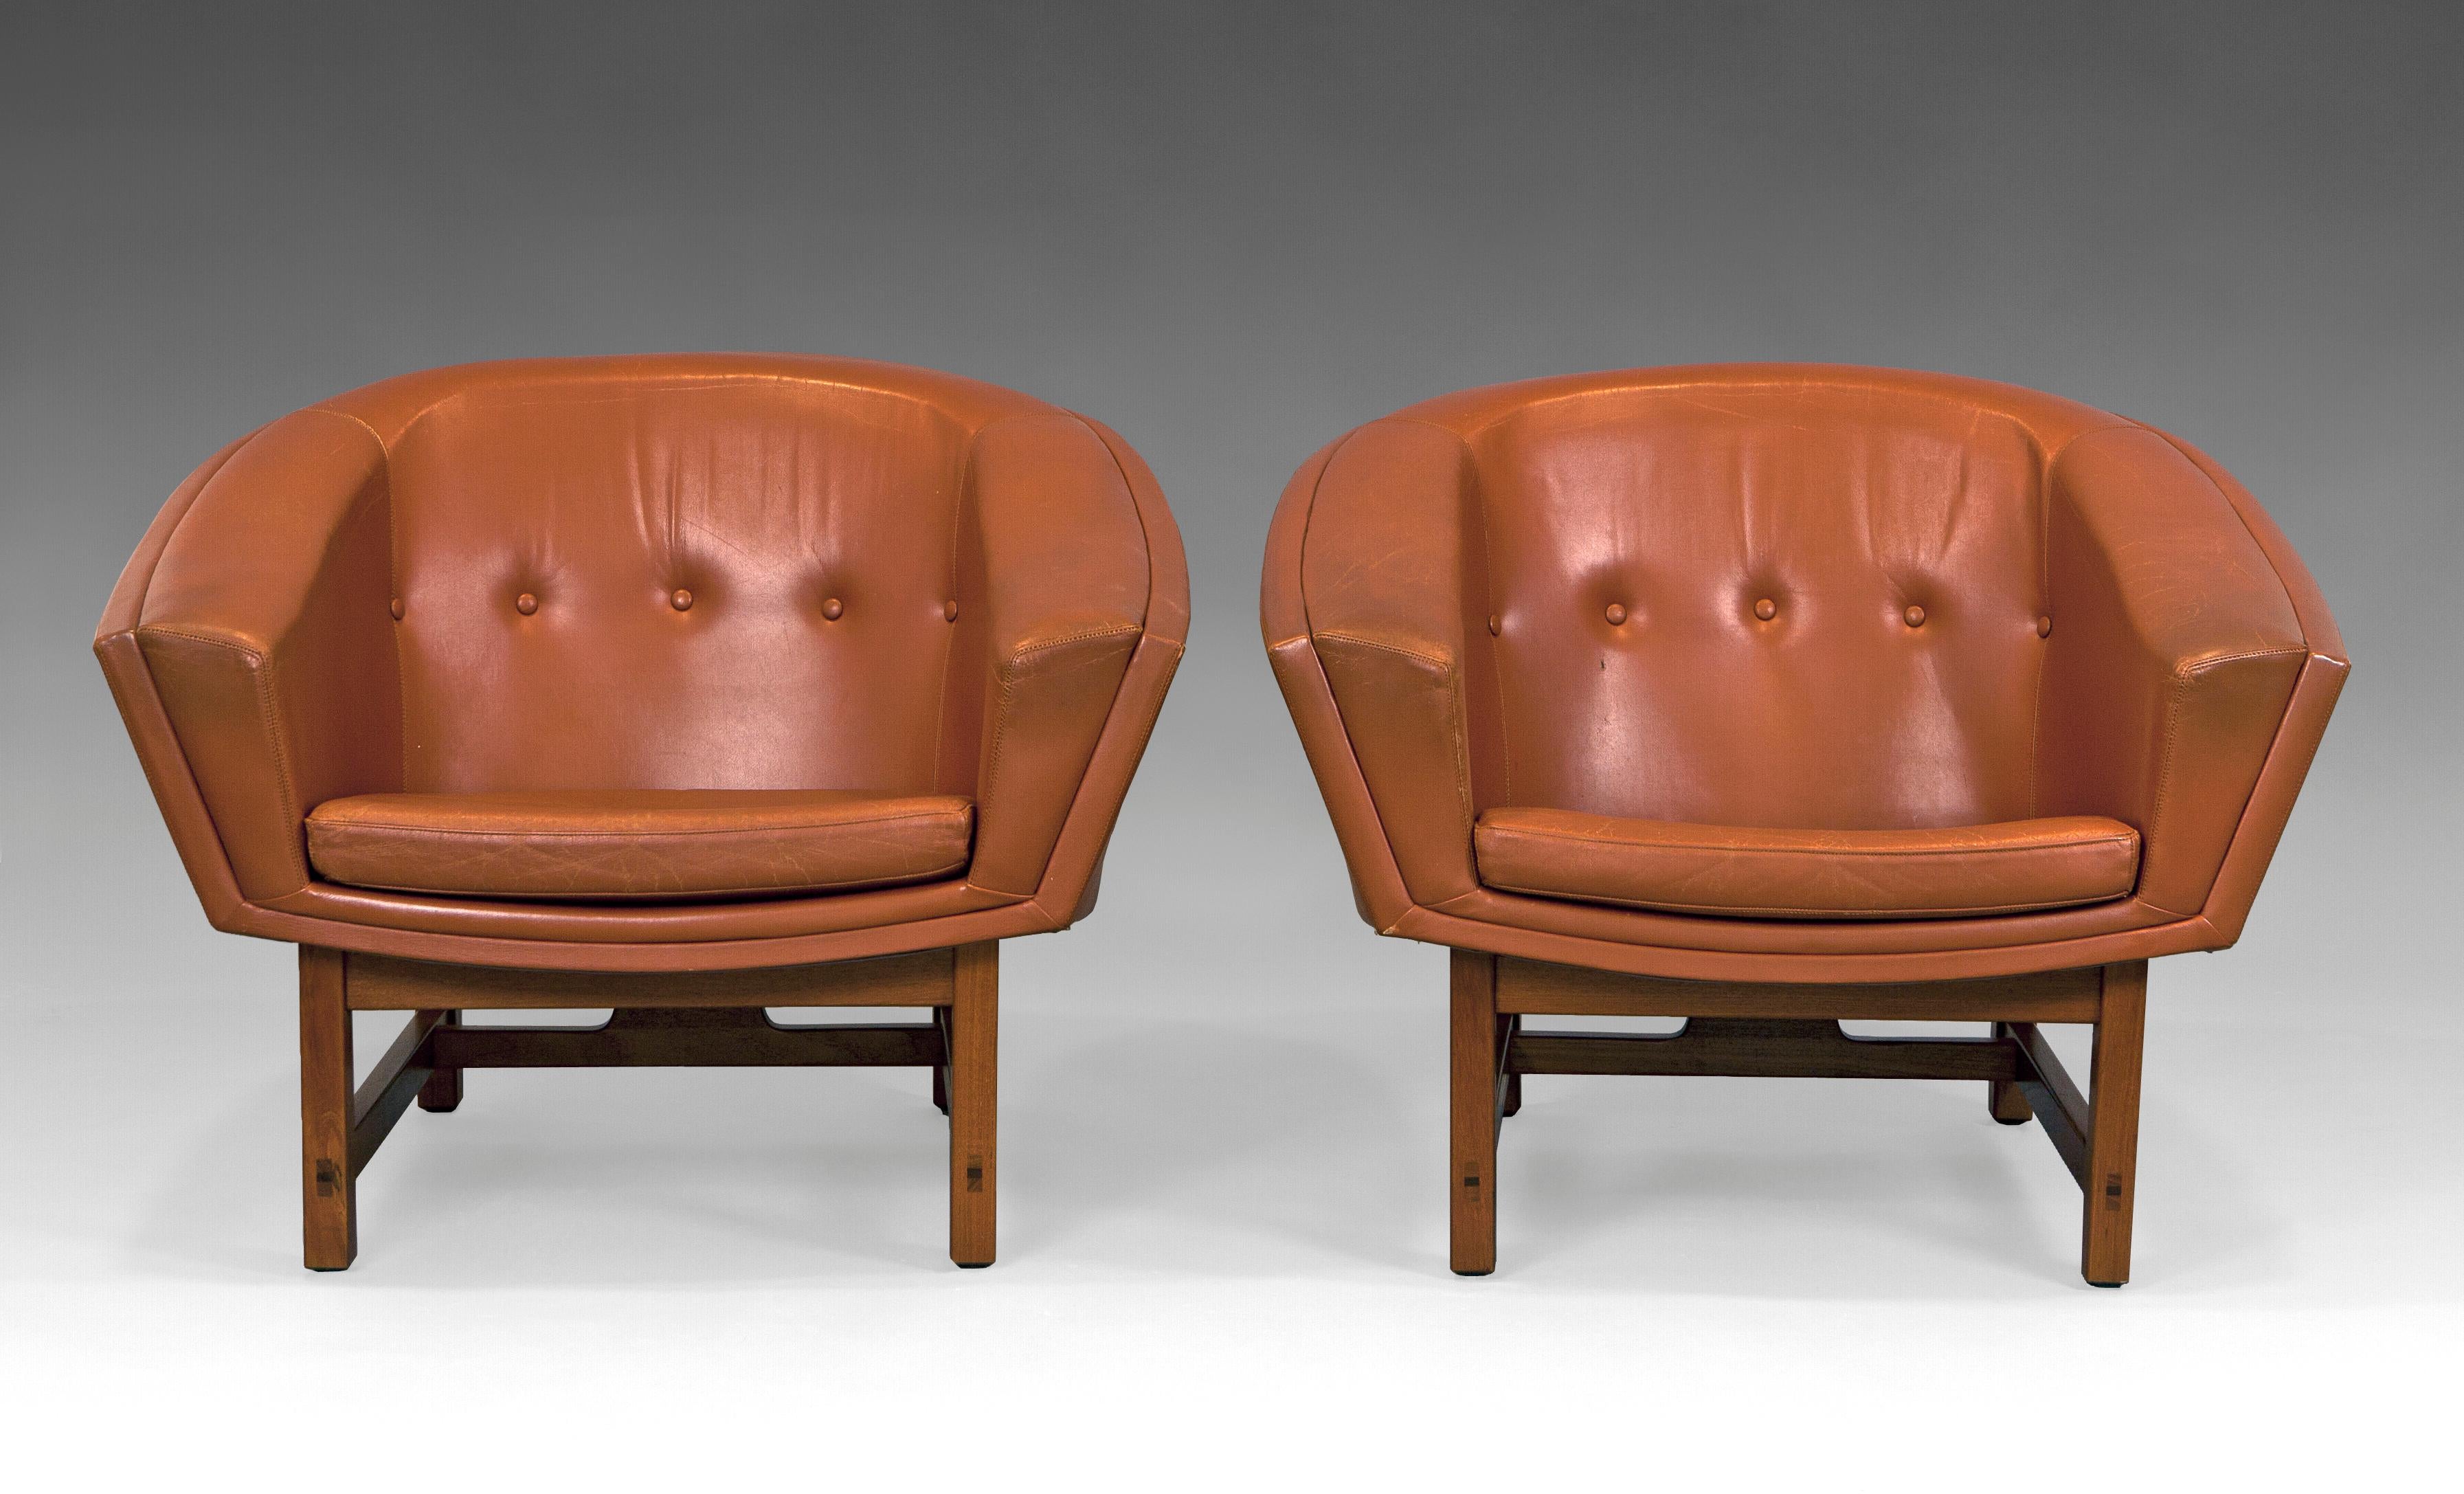 Set of two Corona Series armchairs by Lennart Bender for Ulferts Fabriker. Denmark. ca. 1960
Original Cognag colored leather ulpholstery on a solid teak wood structure.
Restored wood and original leather in very good condition.
 